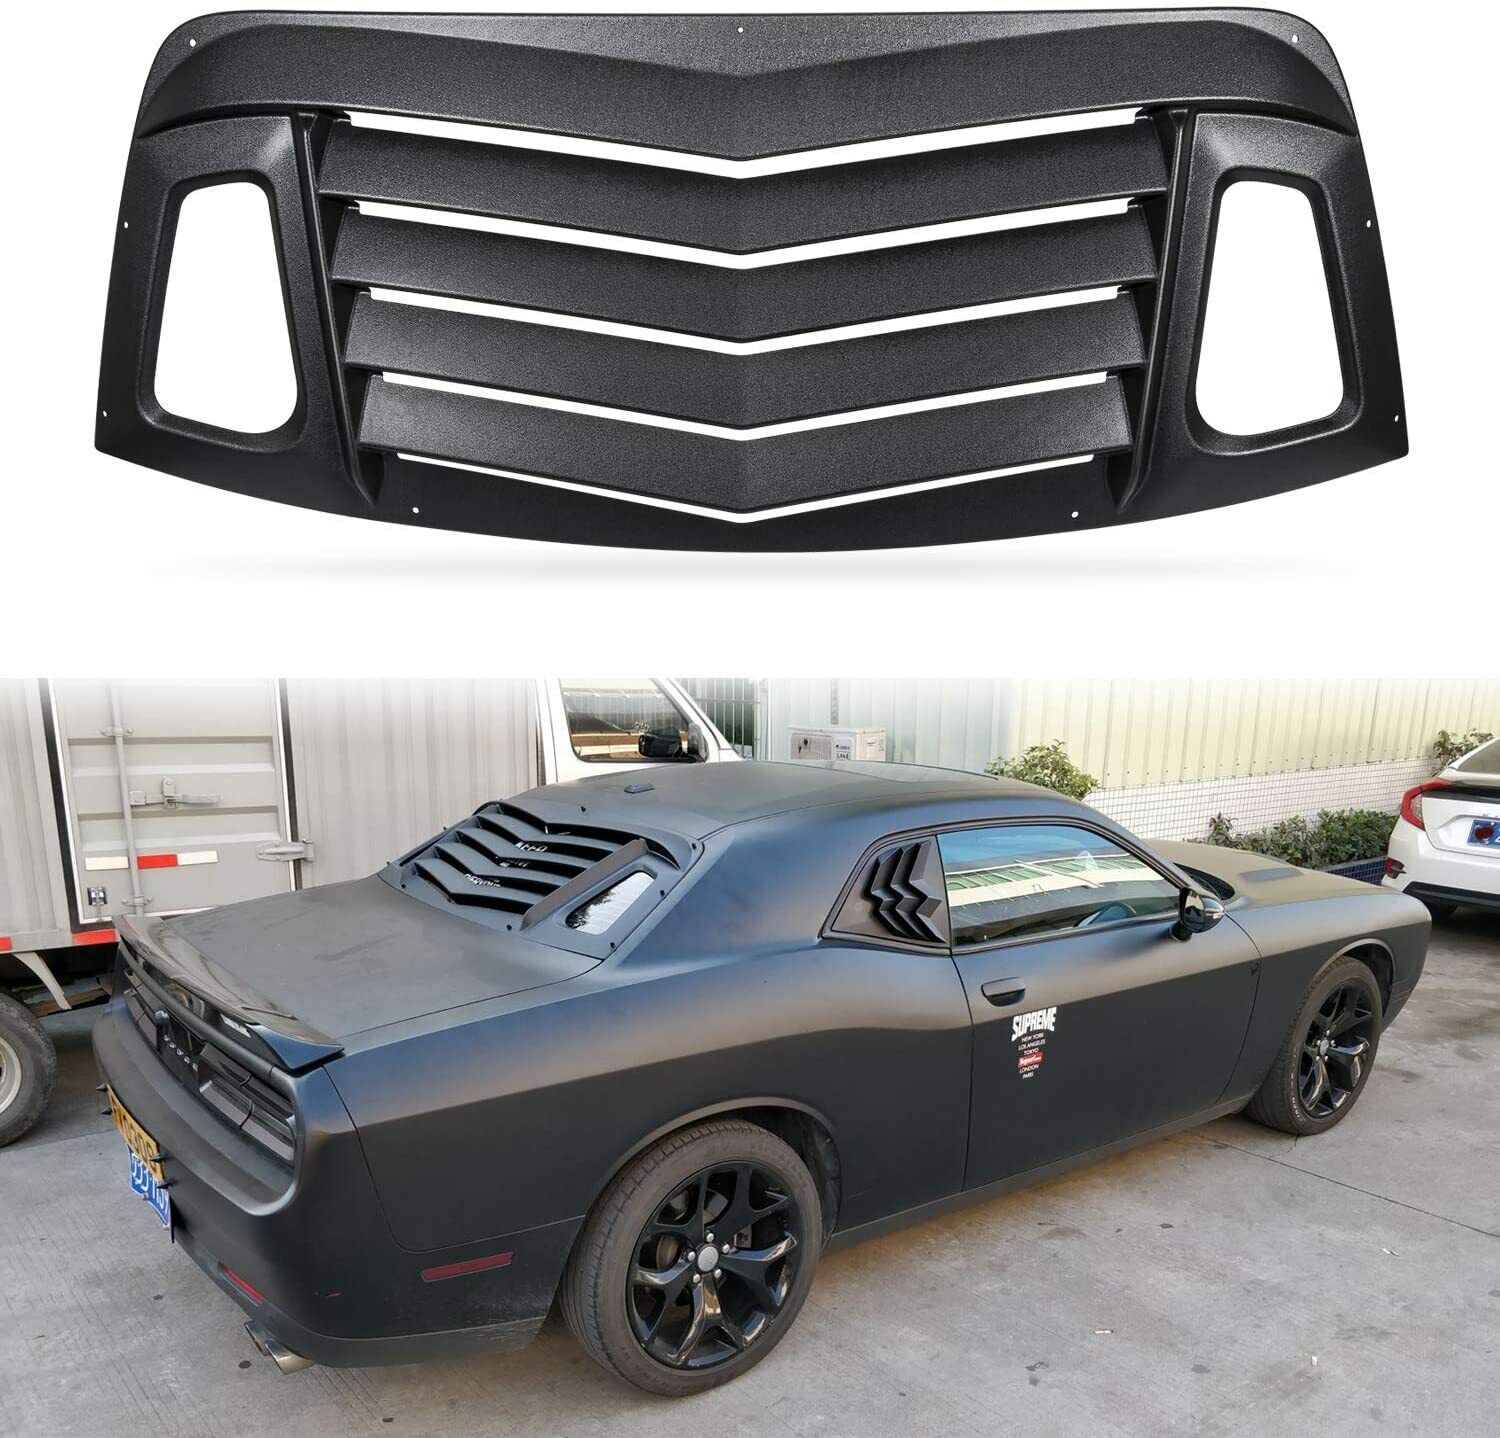 Rear Window Louver for Dodge Challenger 2008-2021 Matte Black ABS Window Cover